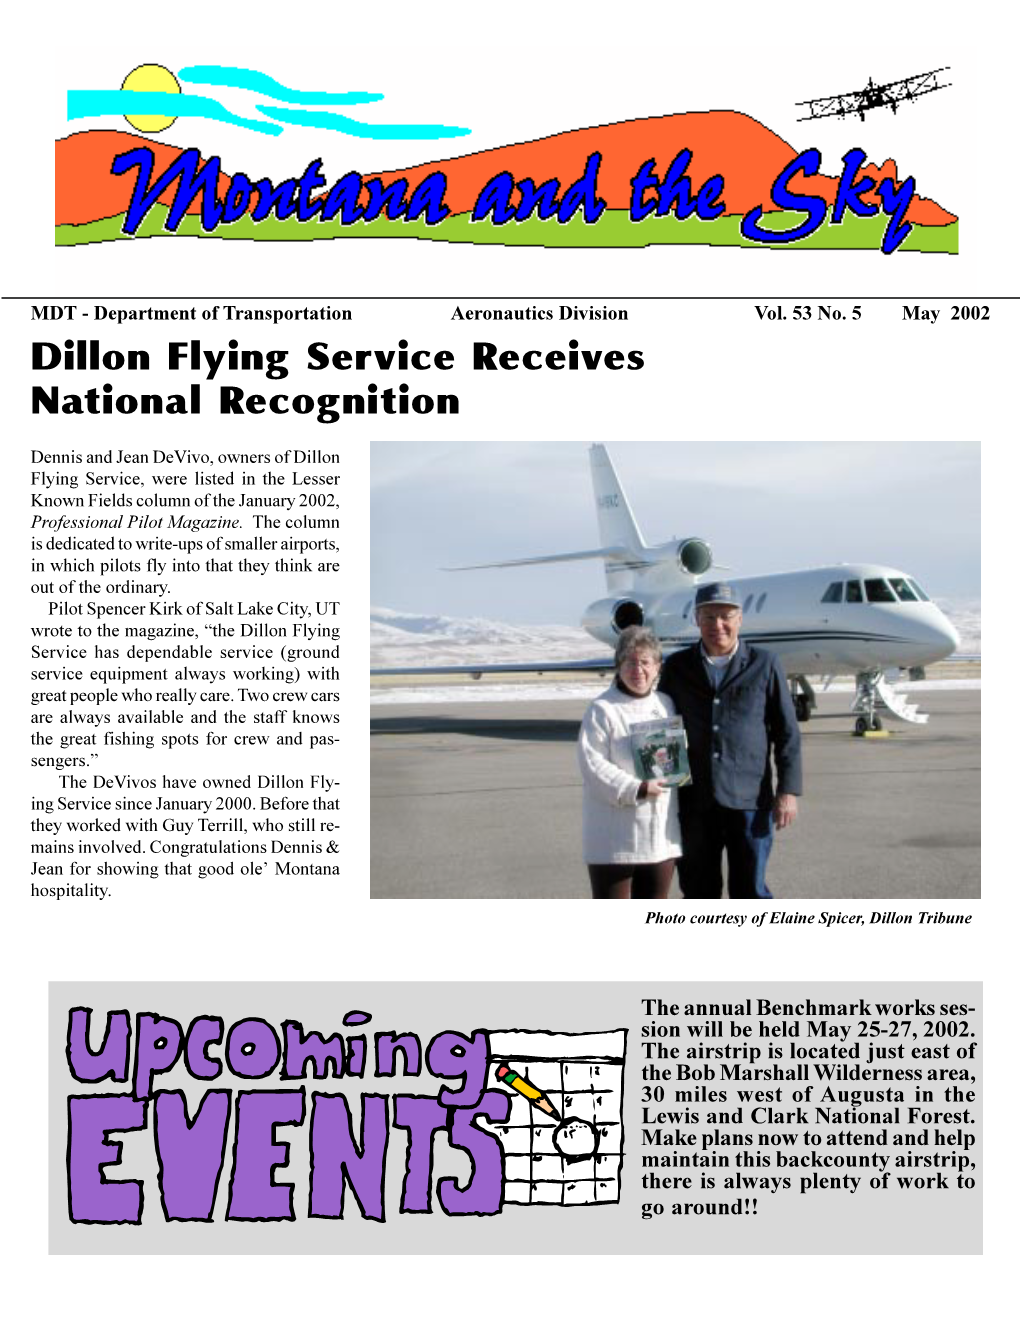 Dillon Flying Service Receives National Recognition